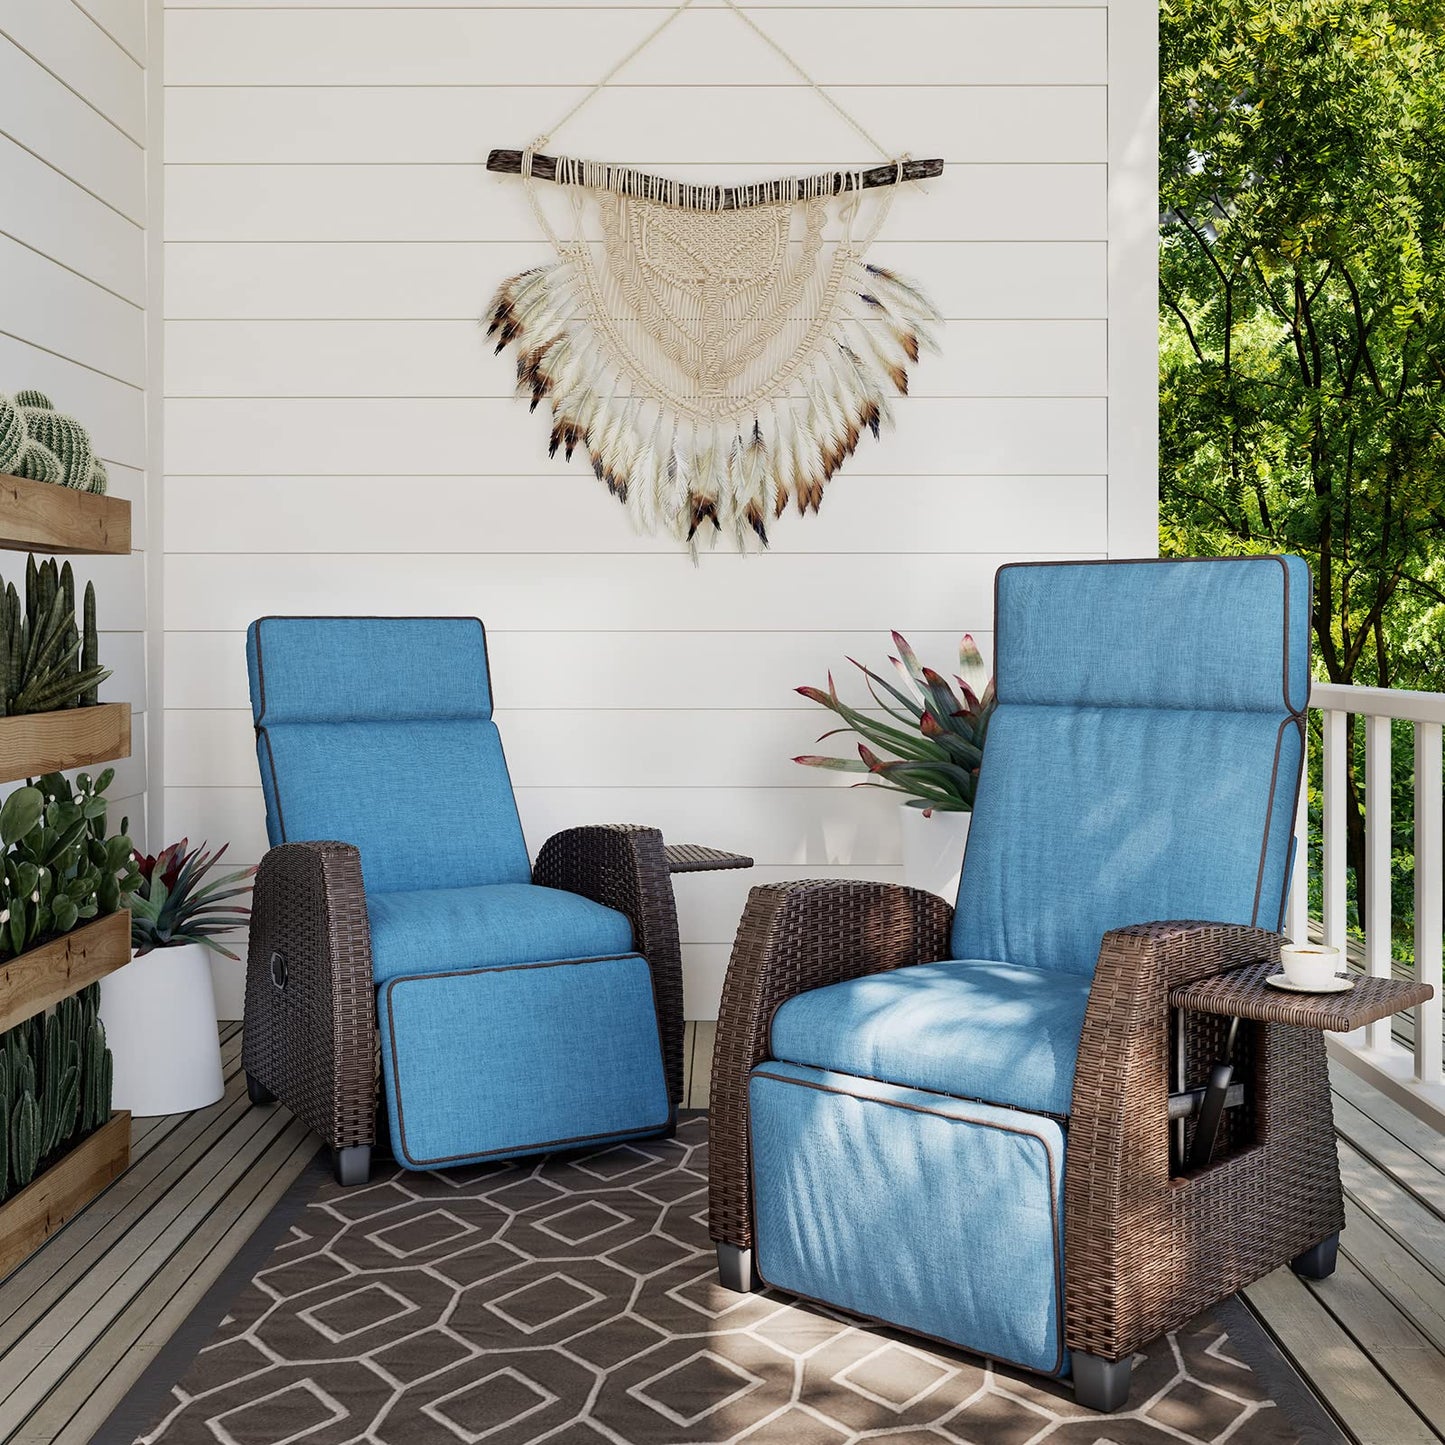 Grand patio Indoor & Outdoor Moor Recliner PE Wicker with Flip Table Push Back Reclining Lounge Chair, Peacock Blue 1 PCS